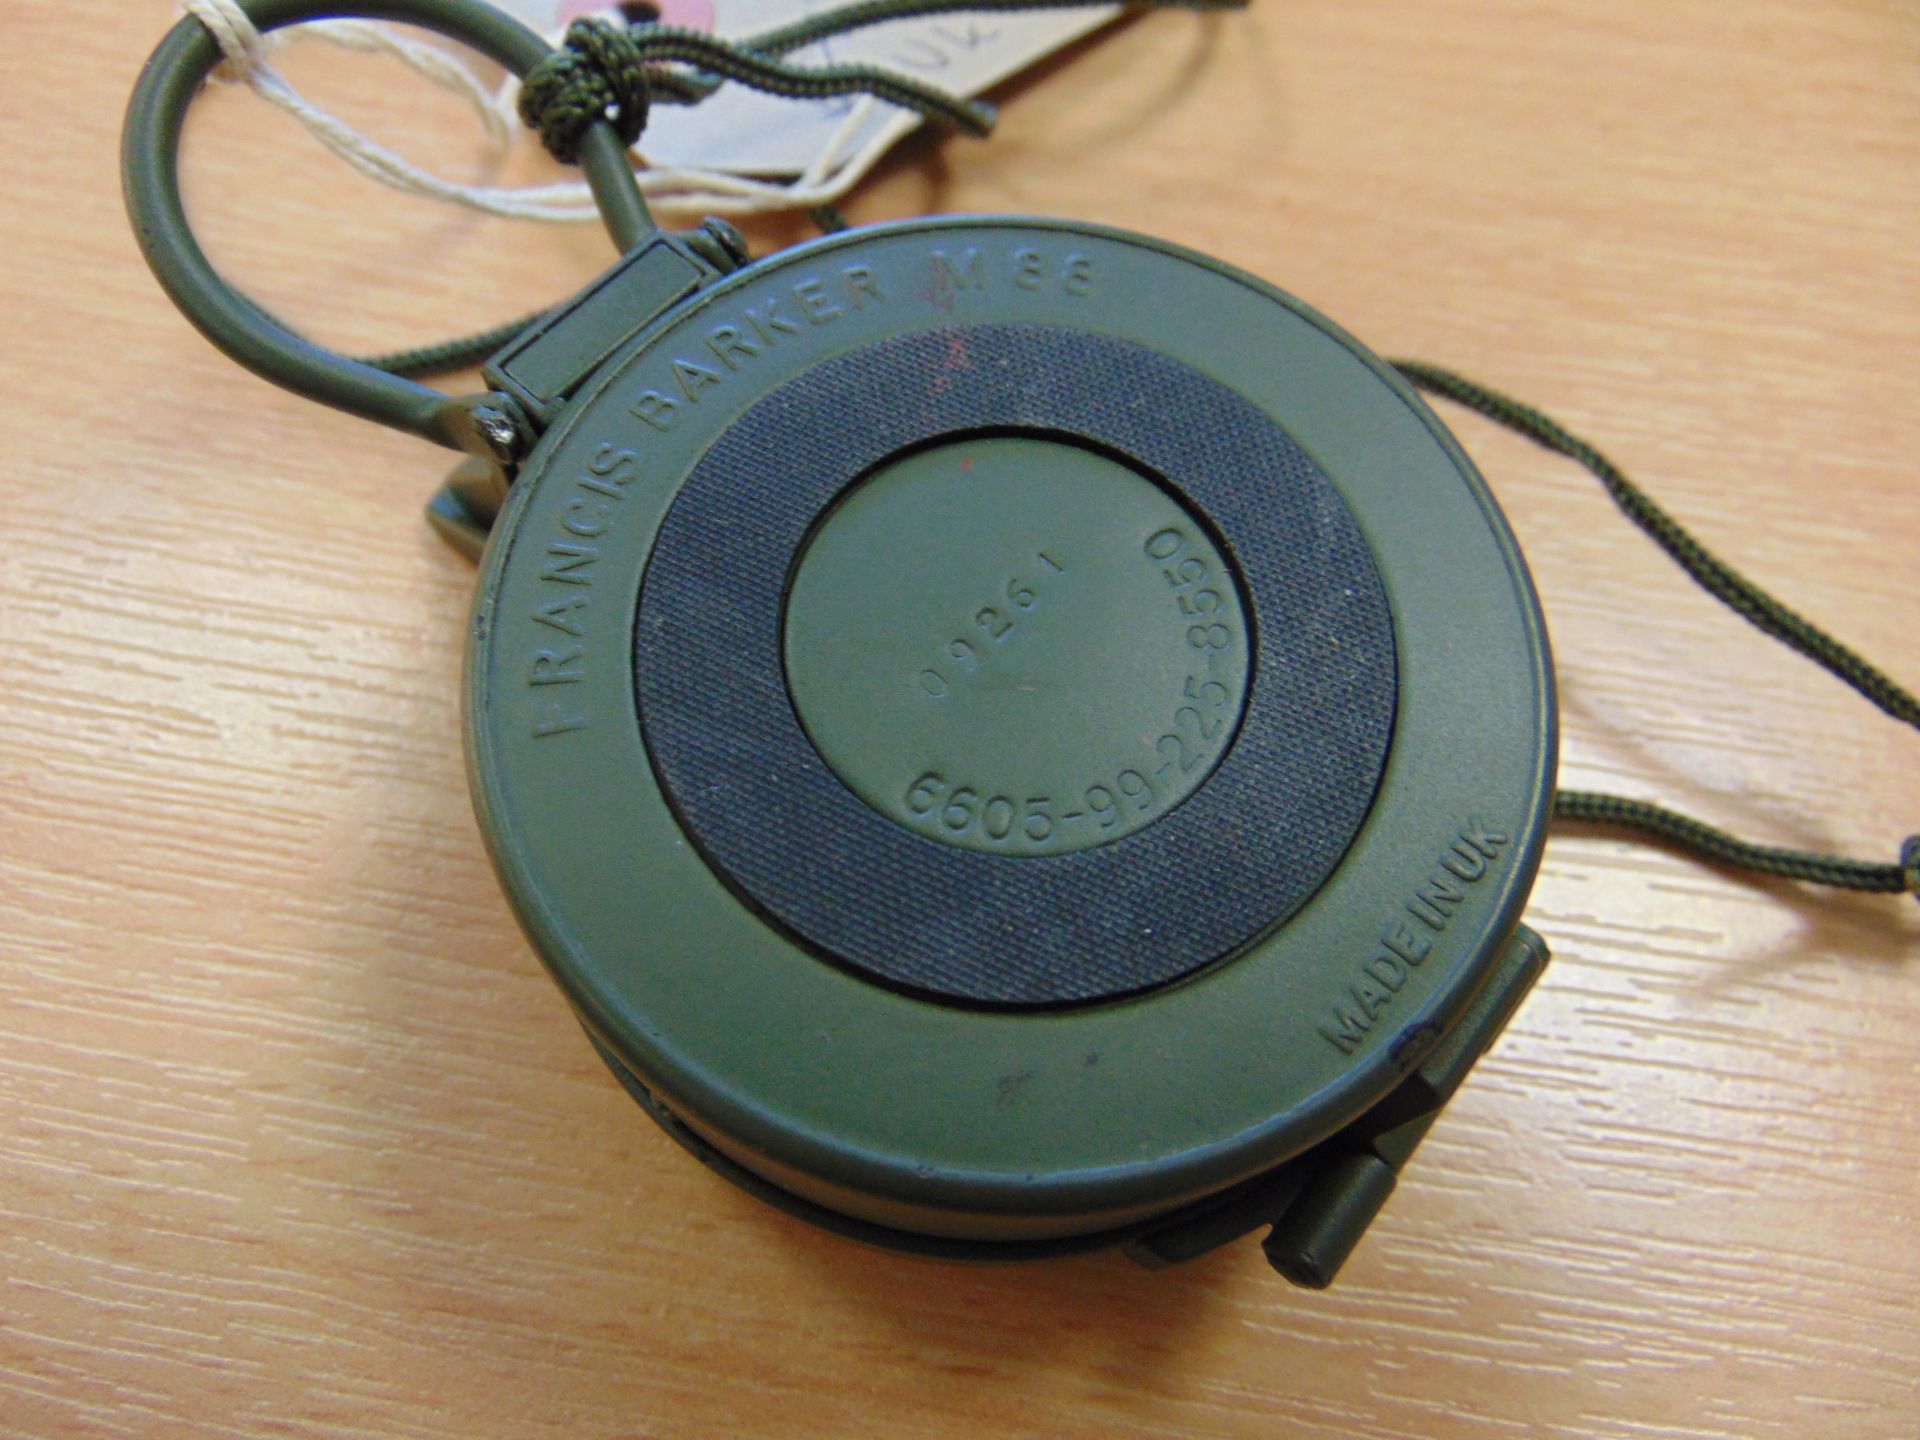 Genuine Unissued British Army Francis Barker M88 Marching Compass - Image 7 of 7